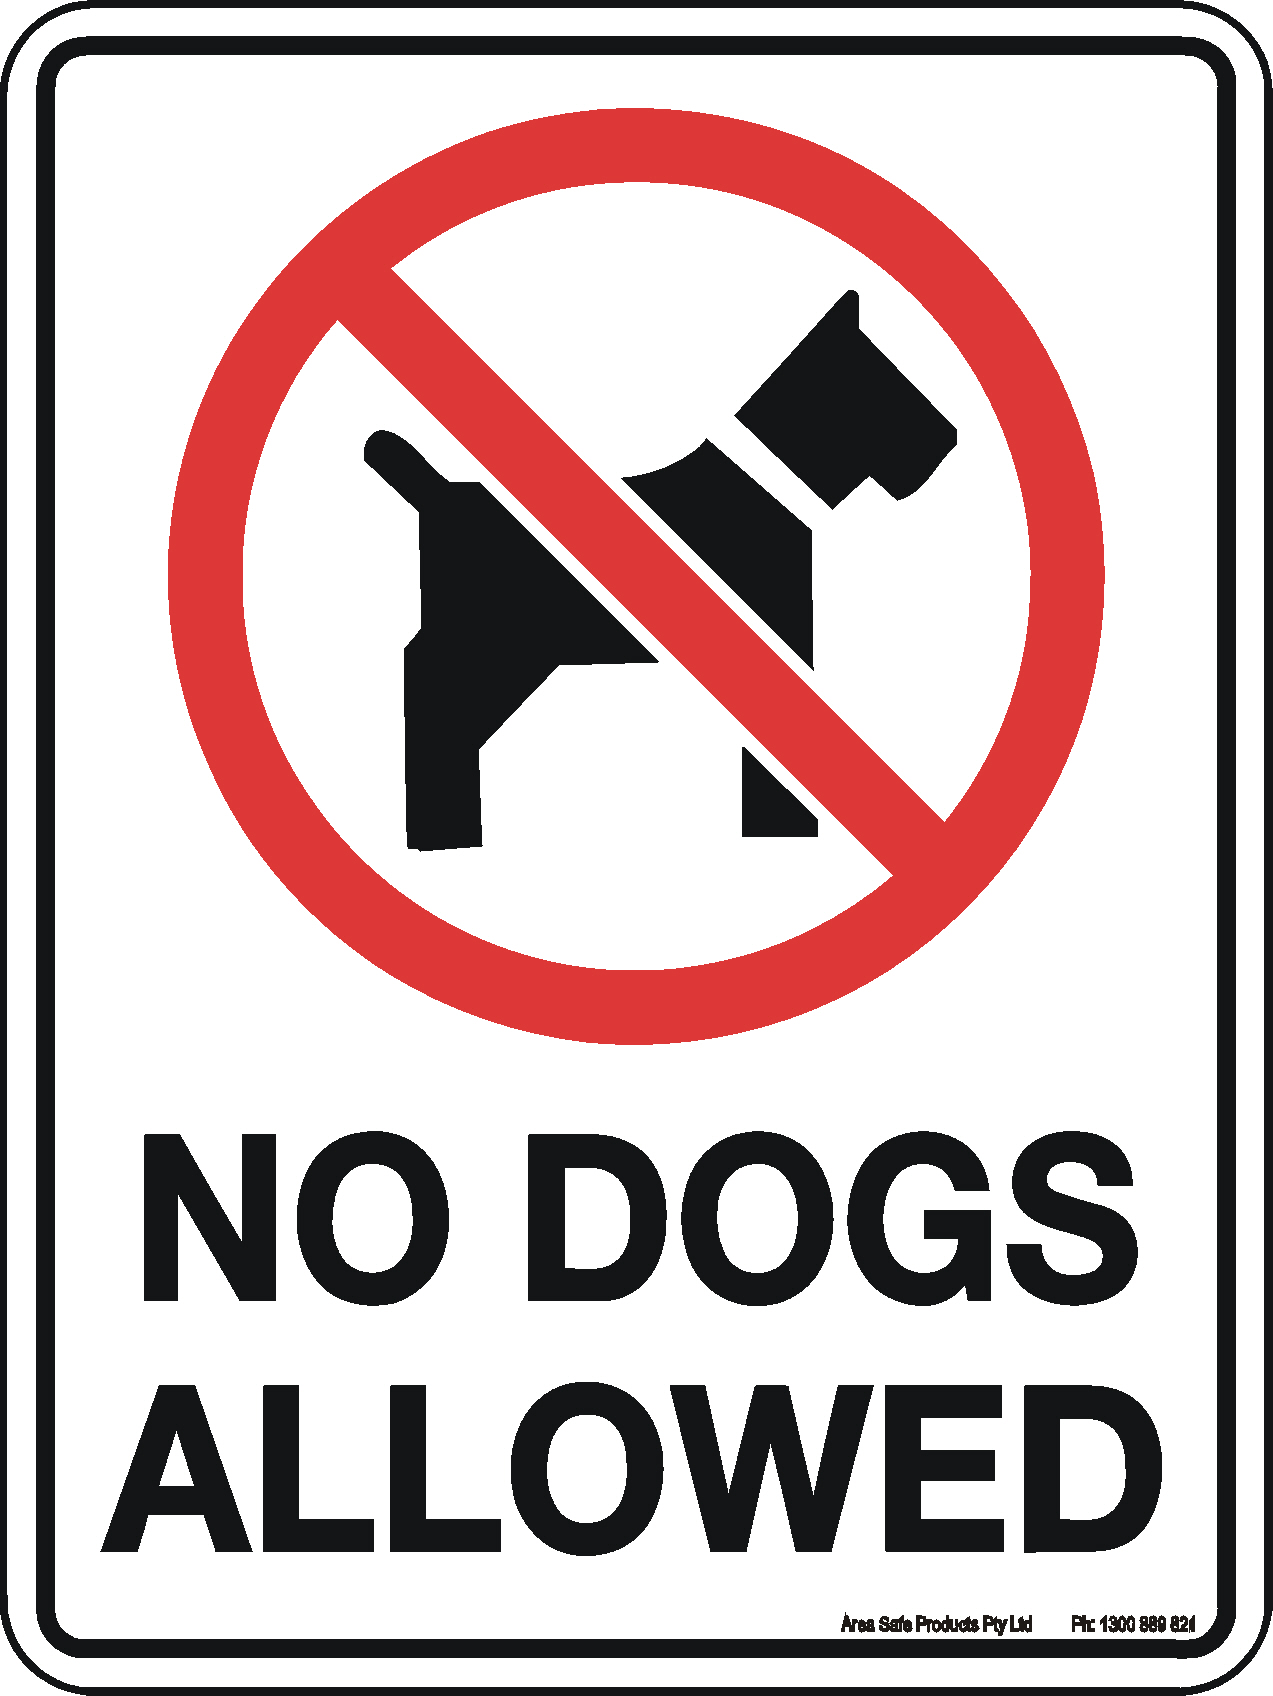 Allow images. No Dogs allowed. No Dogs allowed sign. Знак Russians and Dogs are not allowed. Not allowed Dog.